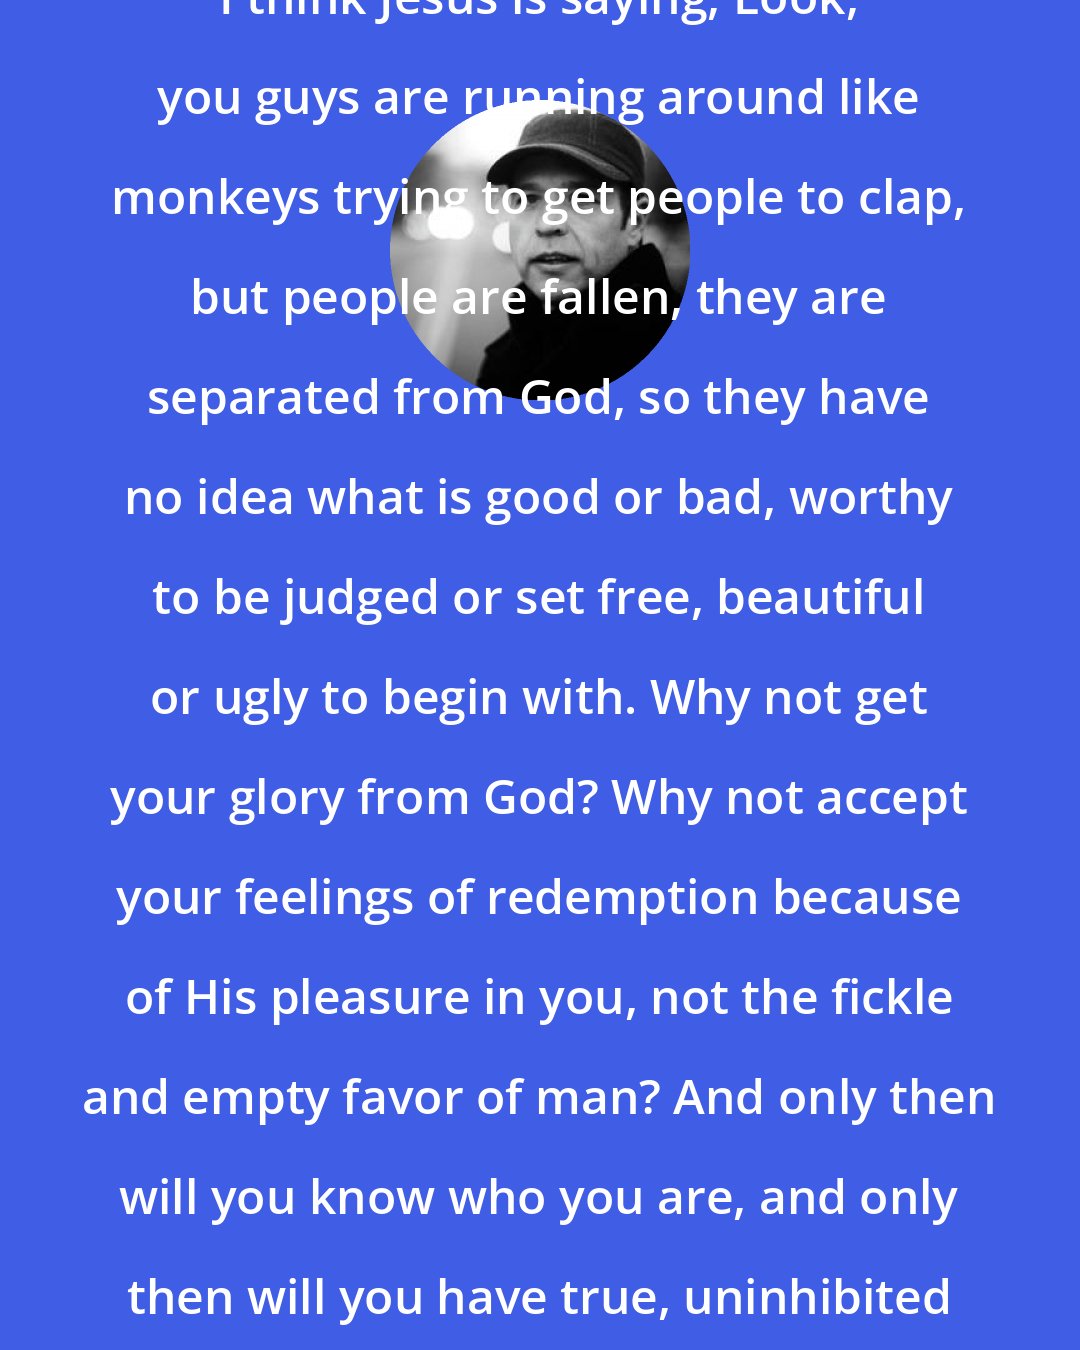 Donald Miller: I think Jesus is saying, Look, you guys are running around like monkeys trying to get people to clap, but people are fallen, they are separated from God, so they have no idea what is good or bad, worthy to be judged or set free, beautiful or ugly to begin with. Why not get your glory from God? Why not accept your feelings of redemption because of His pleasure in you, not the fickle and empty favor of man? And only then will you know who you are, and only then will you have true, uninhibited relationships with others.